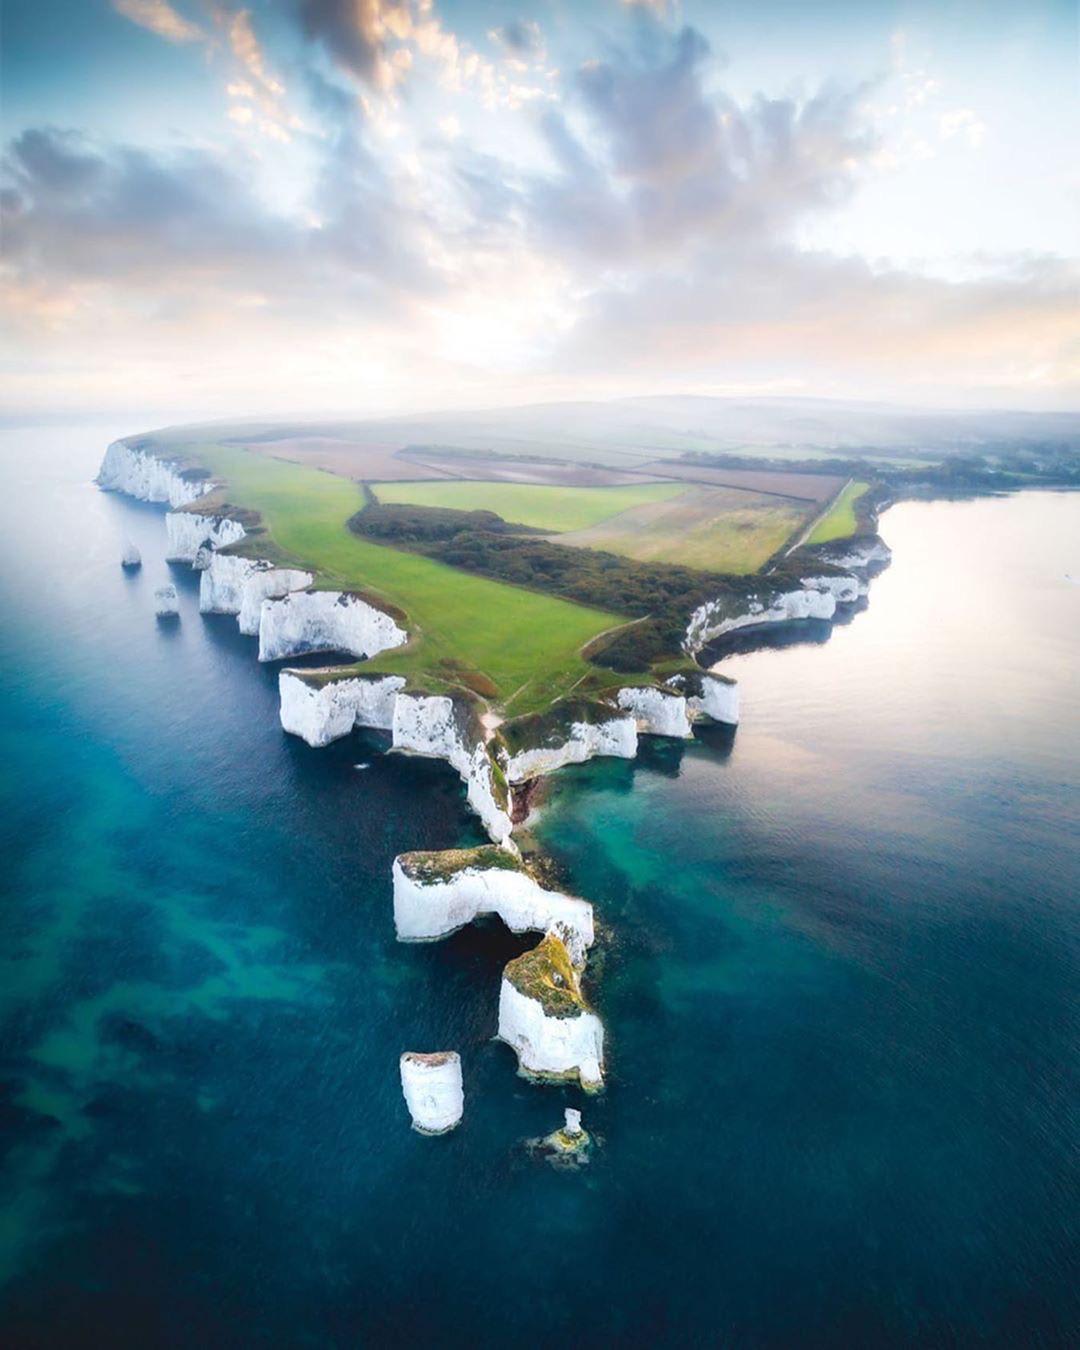 This beautiful shot of England